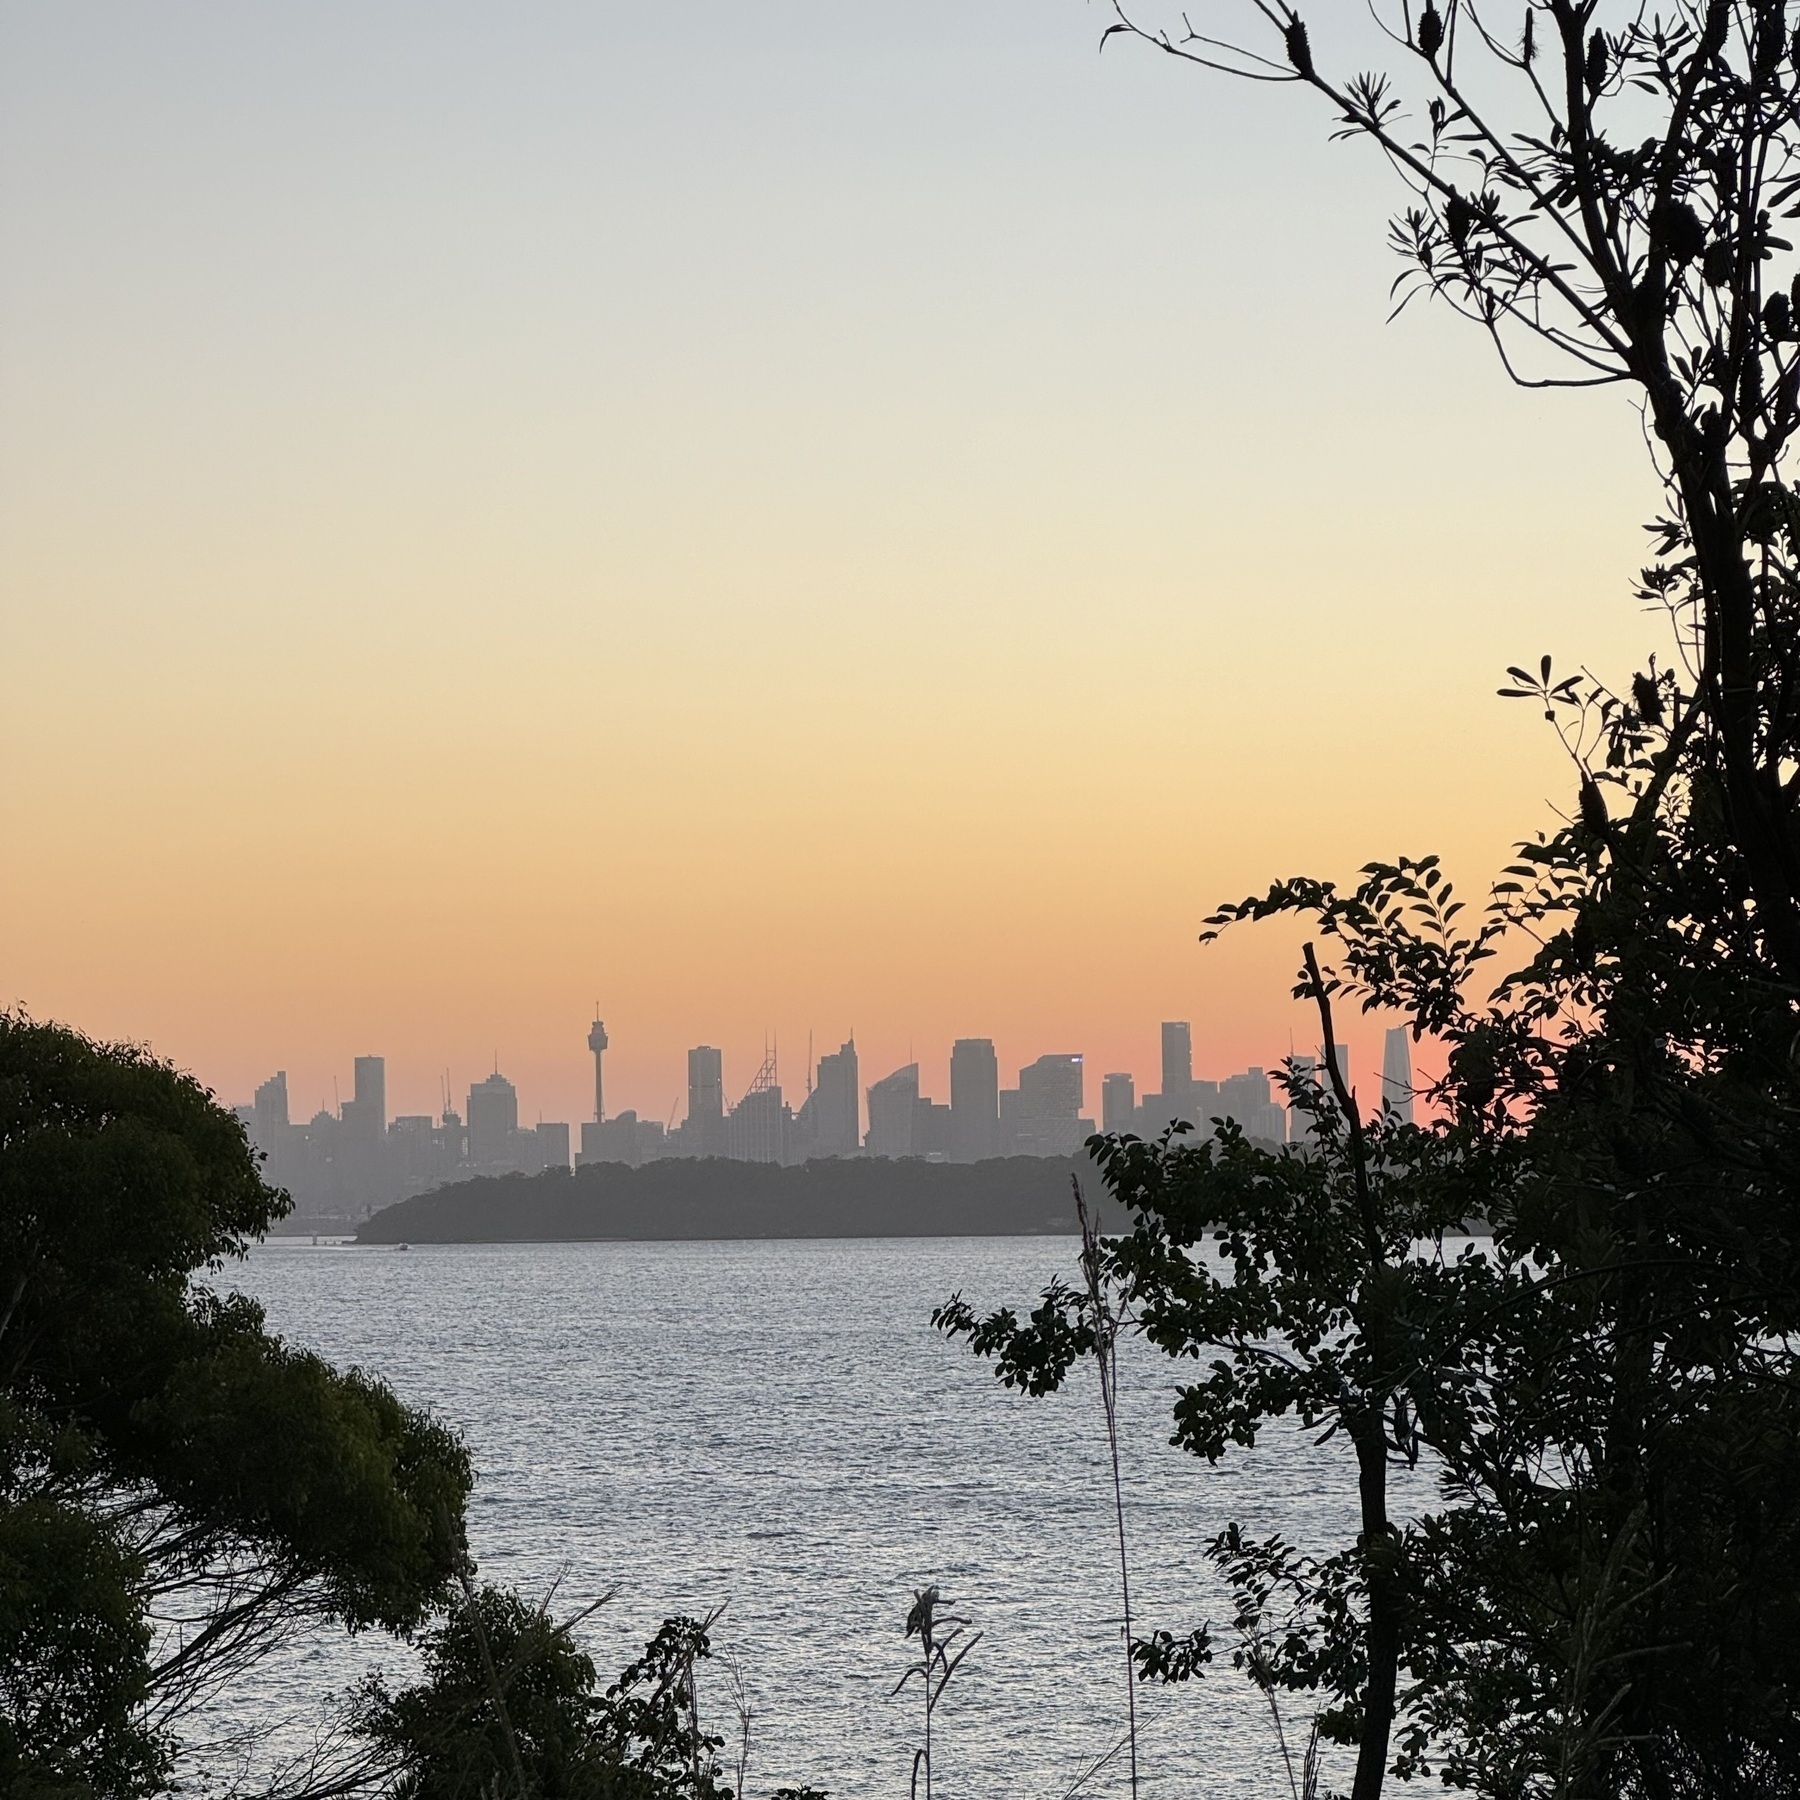 The distant Sydney skyline across water at sunset.